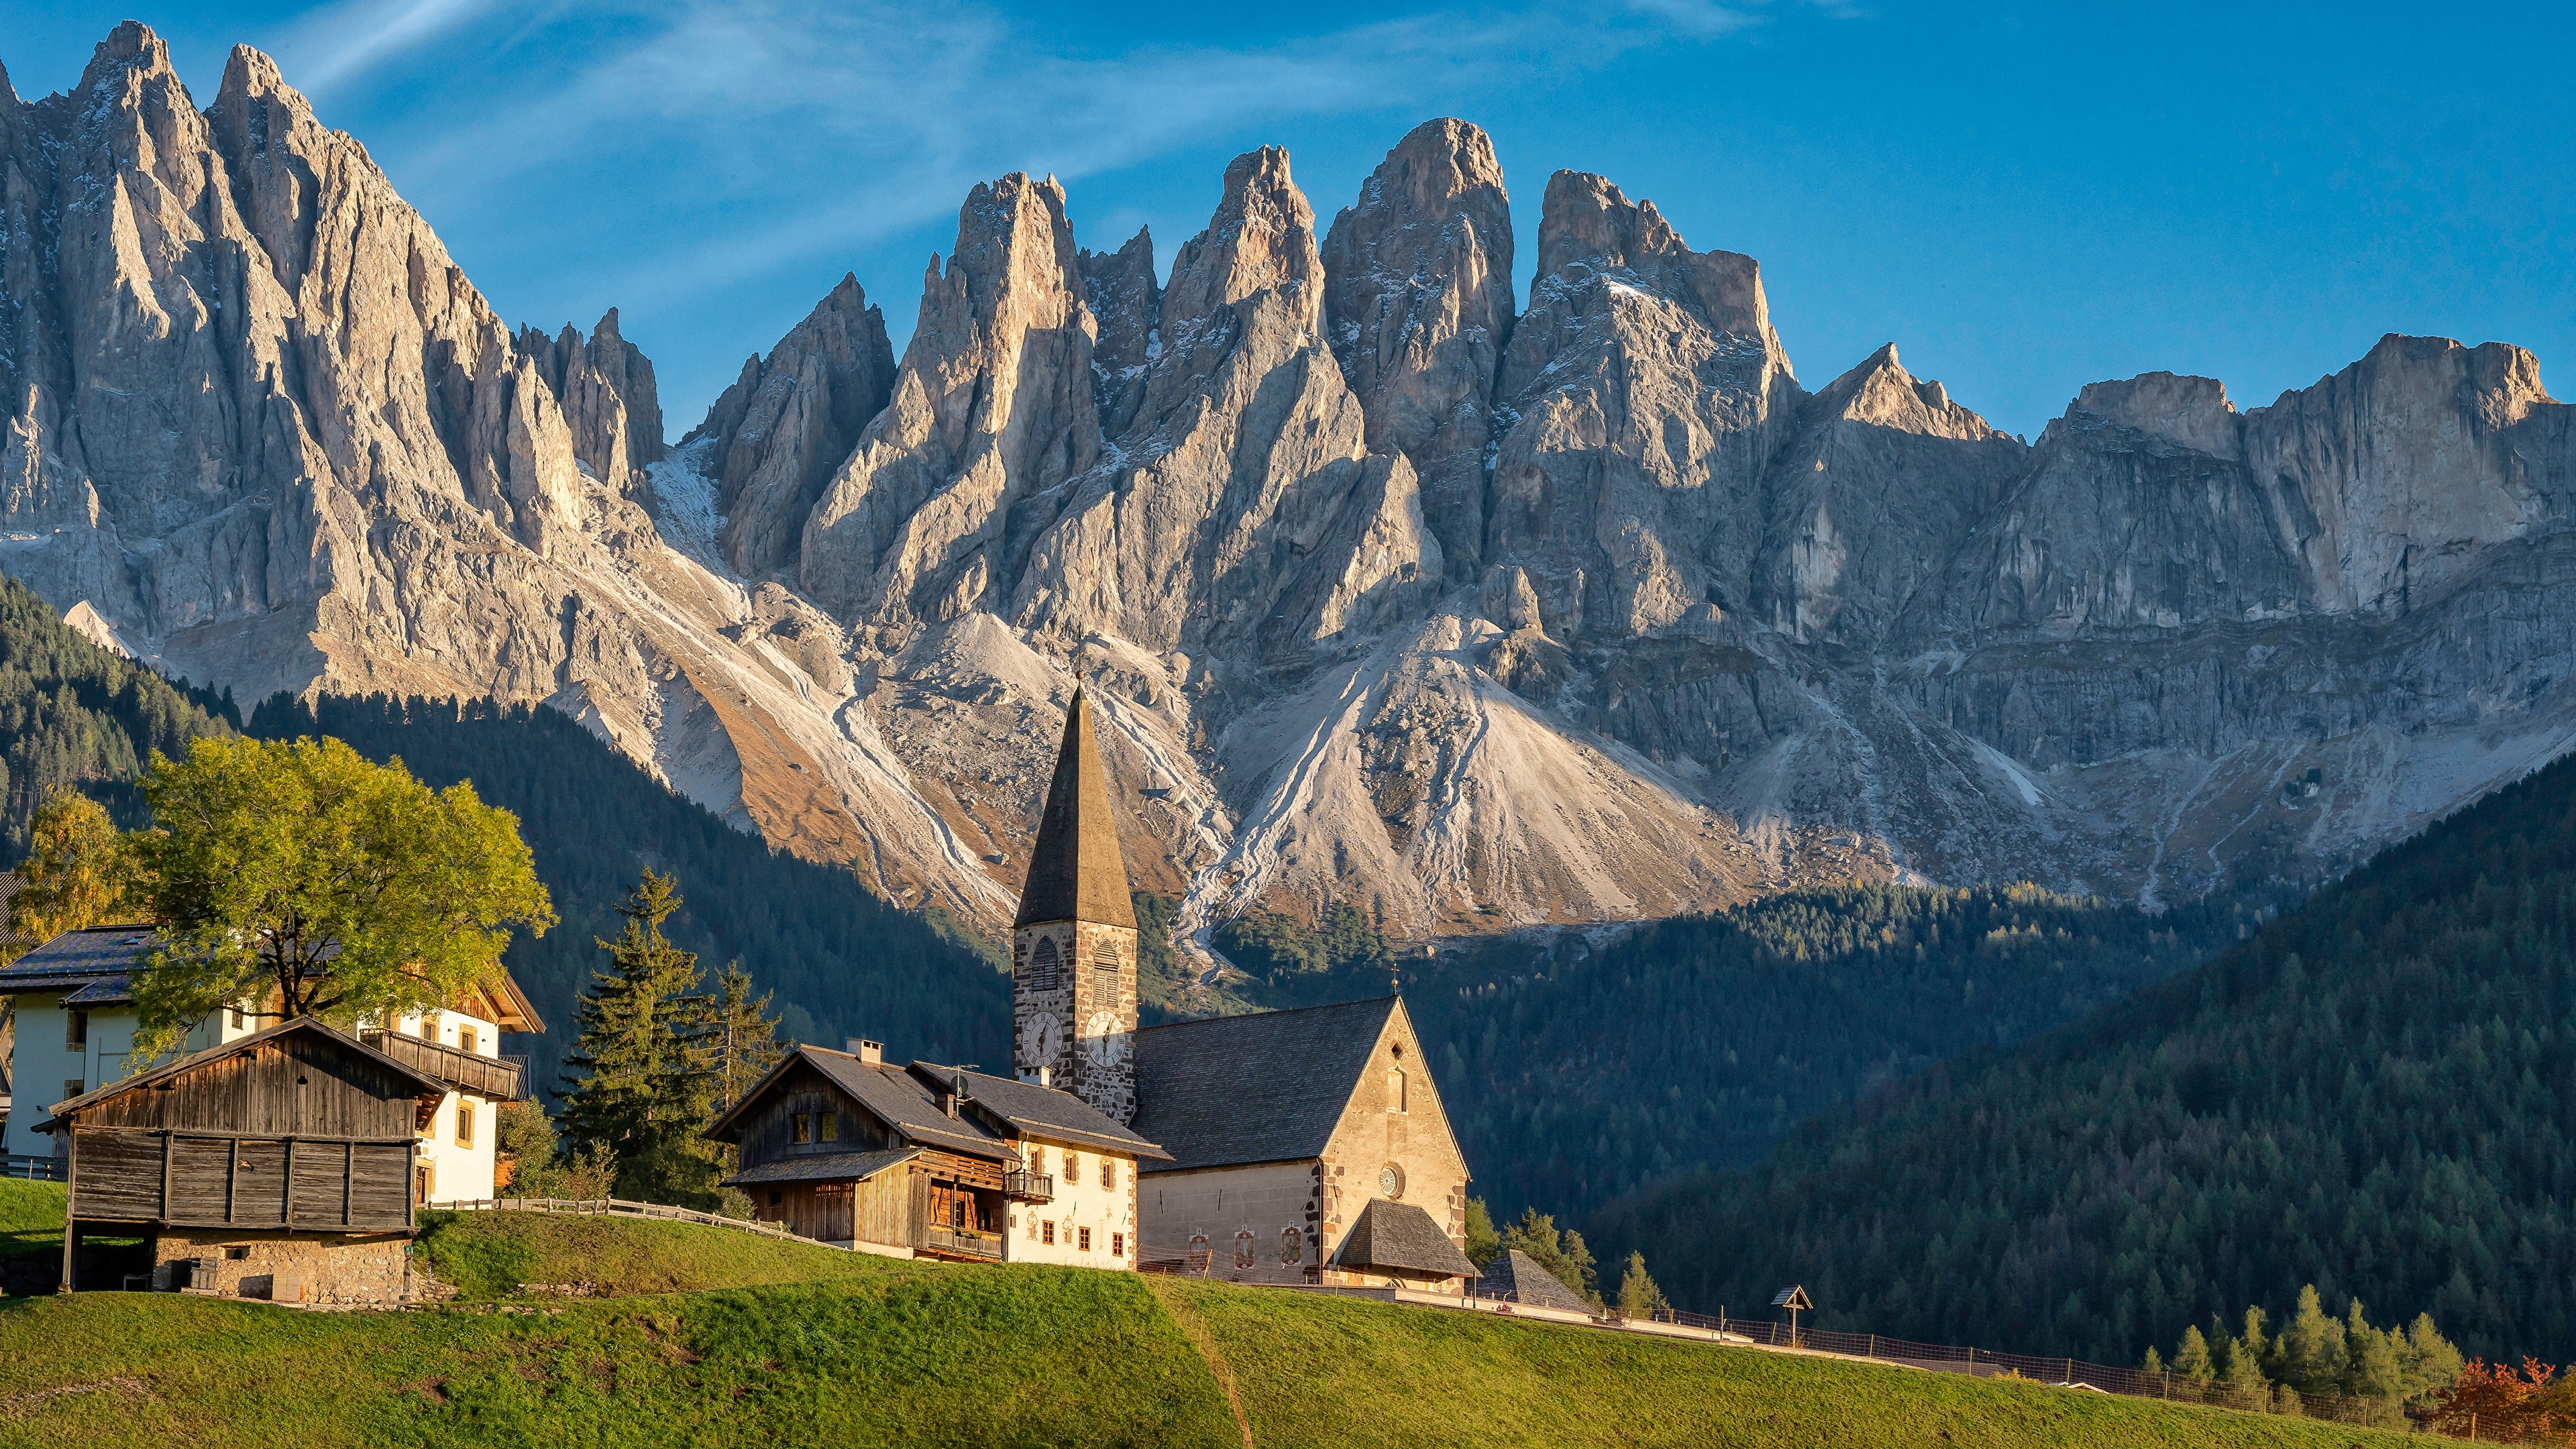 General 3840x2160 nature sky mountains forest landscape Italy Alps Dolomites